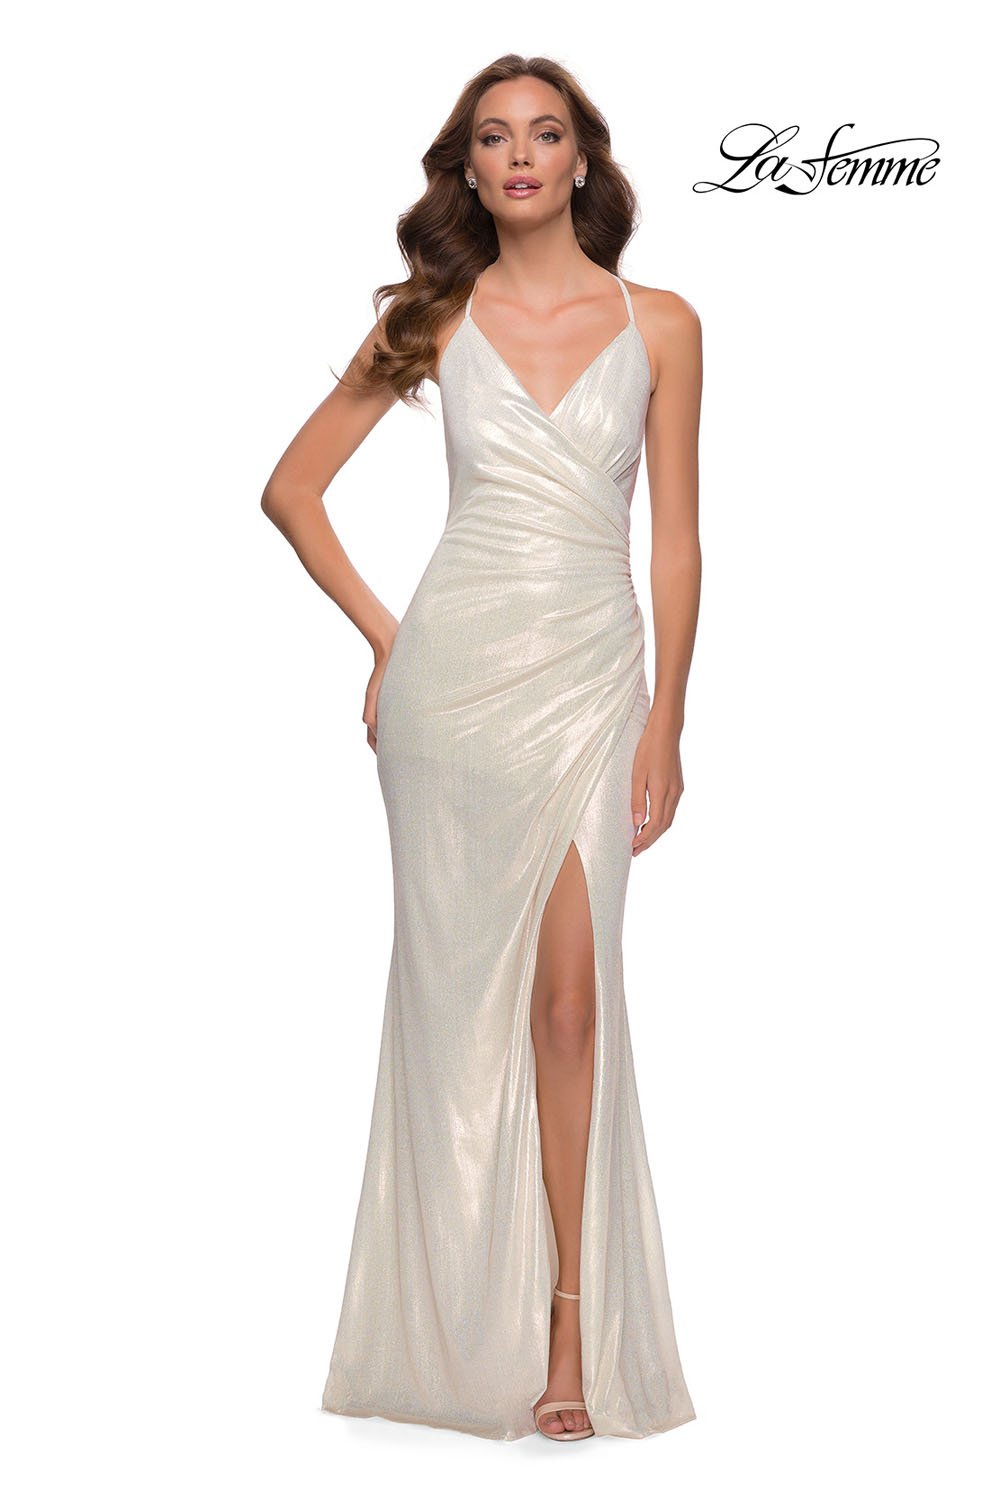 La Femme 29707 dress images in these colors: White Gold.